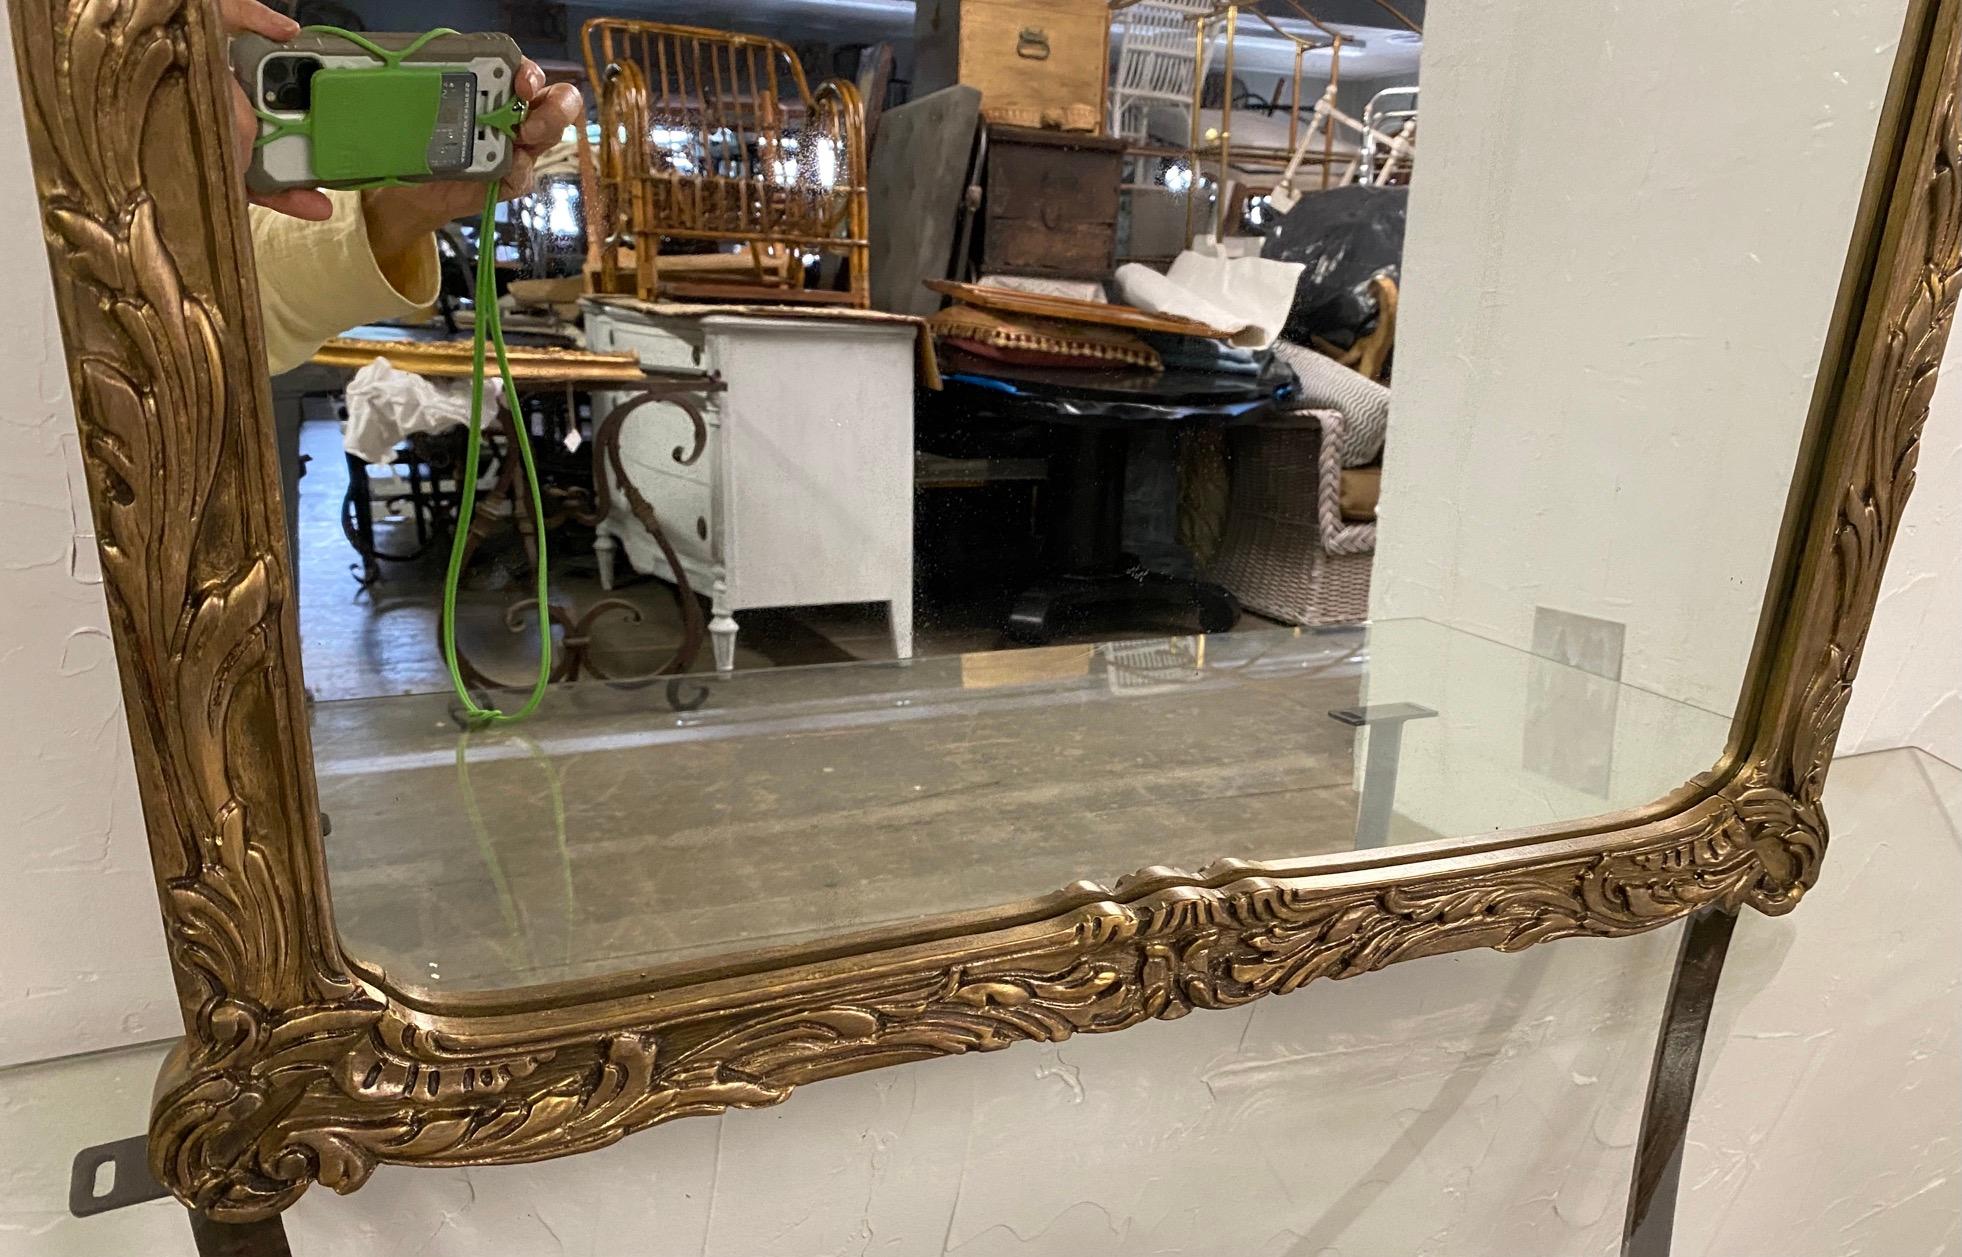 Chinese Chippendale Chinoiserie style gold toned pagoda mirror.
Use for fireplace mirror, mantle mirror, console mirror, wall mirror, pier mirror.
The Rococo style wall mirror in a warm guilt antique finish will also work great as dresser,